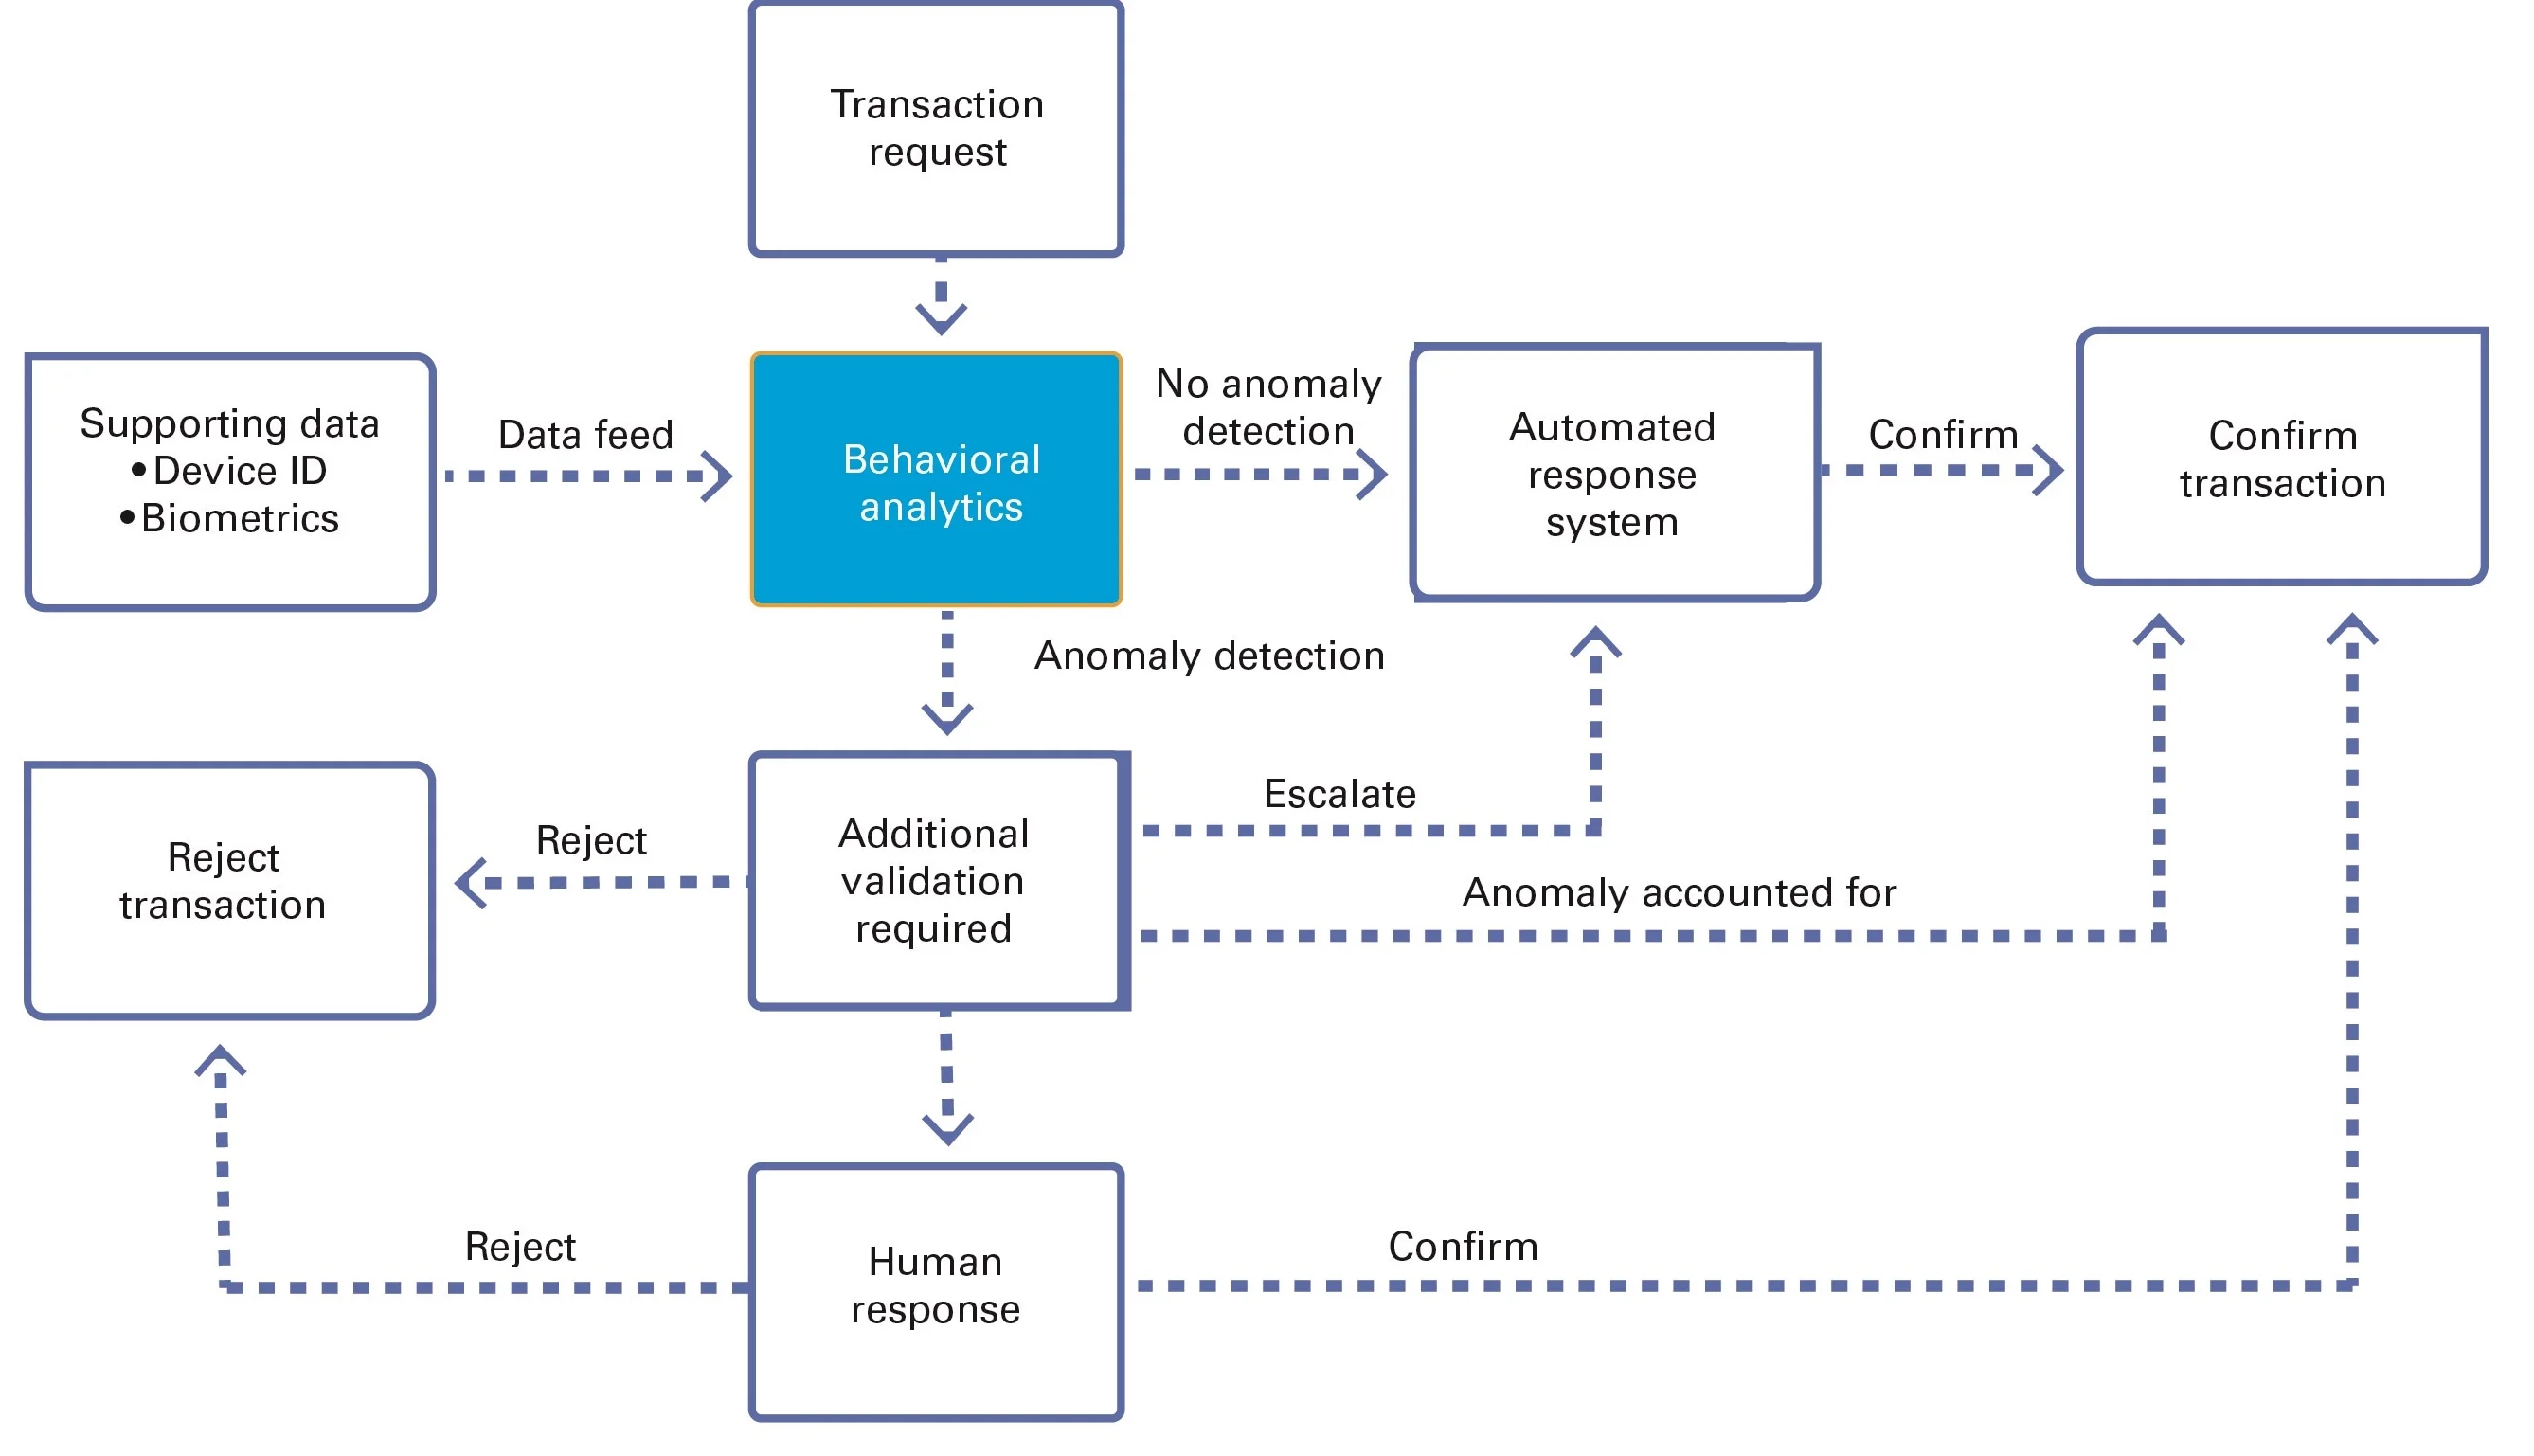 A complex process: an anti-fraud system and its anomaly-detection capabilities